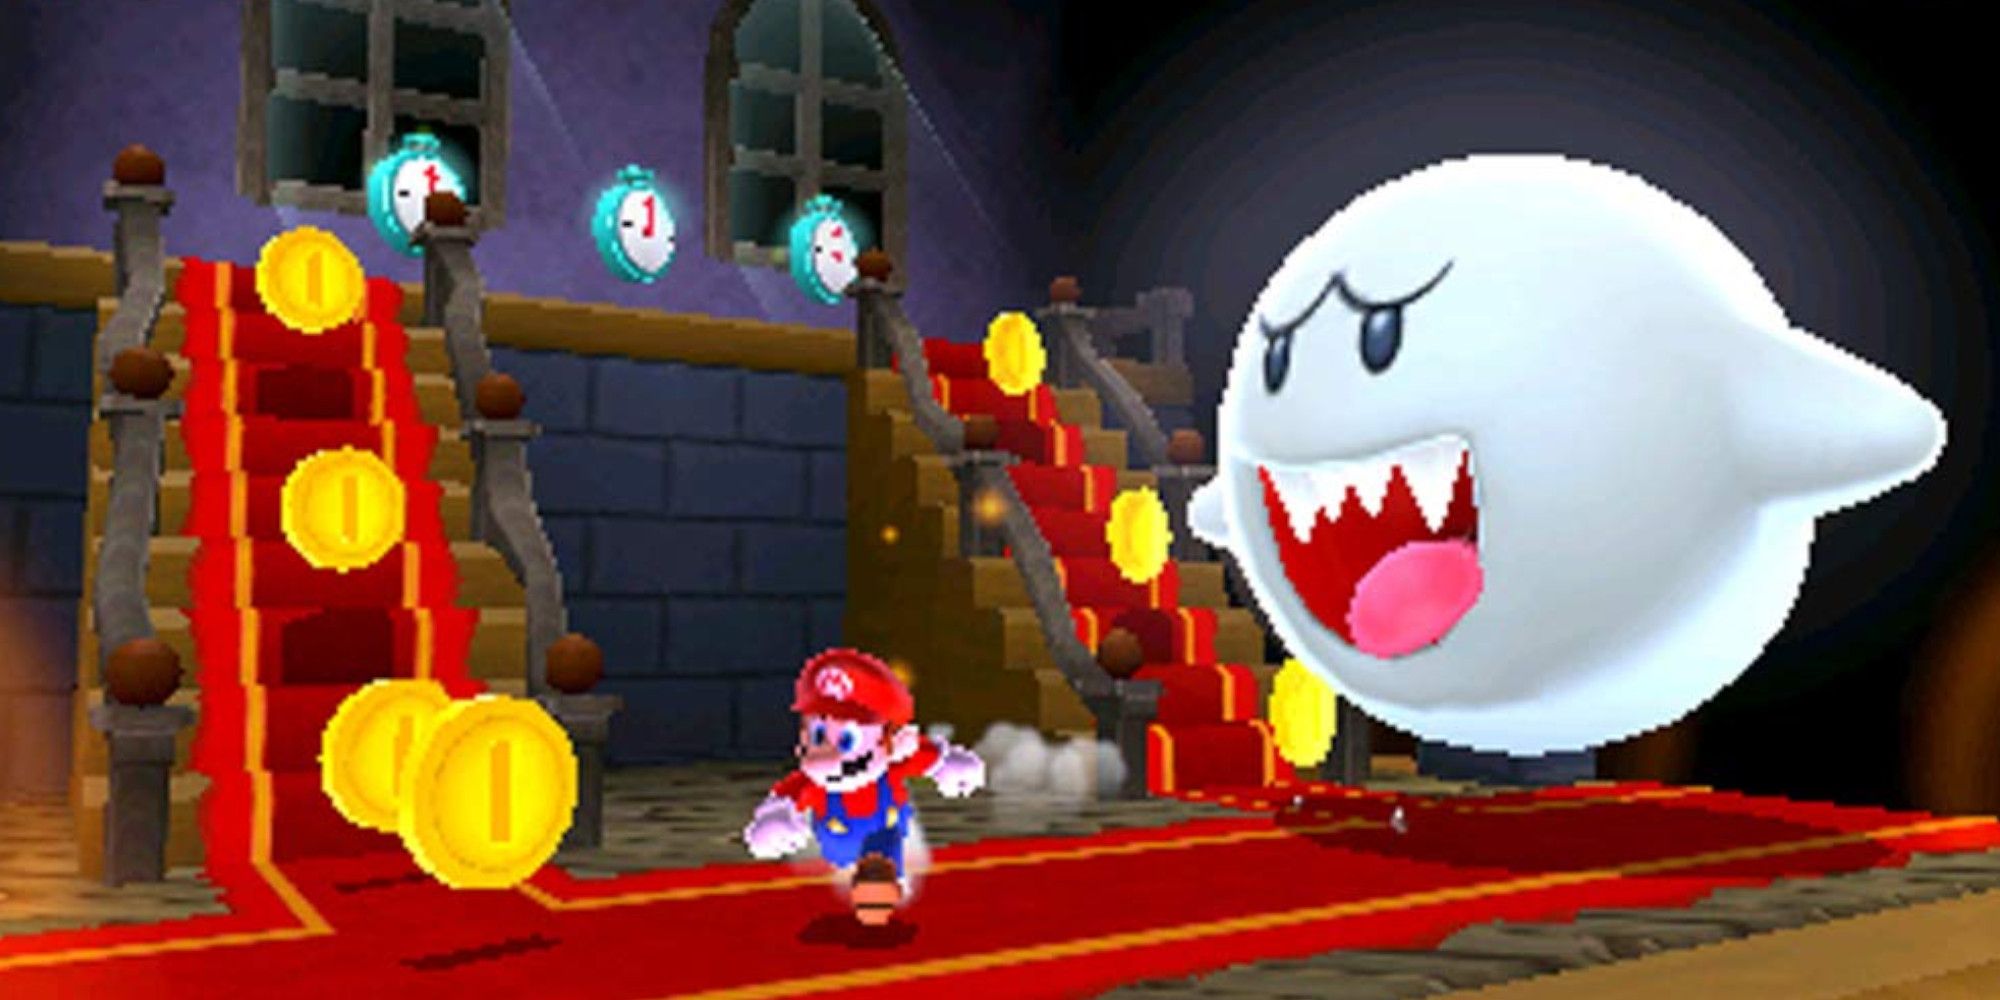 Mario in Super Mario 3D Land is being chased by Big Boo